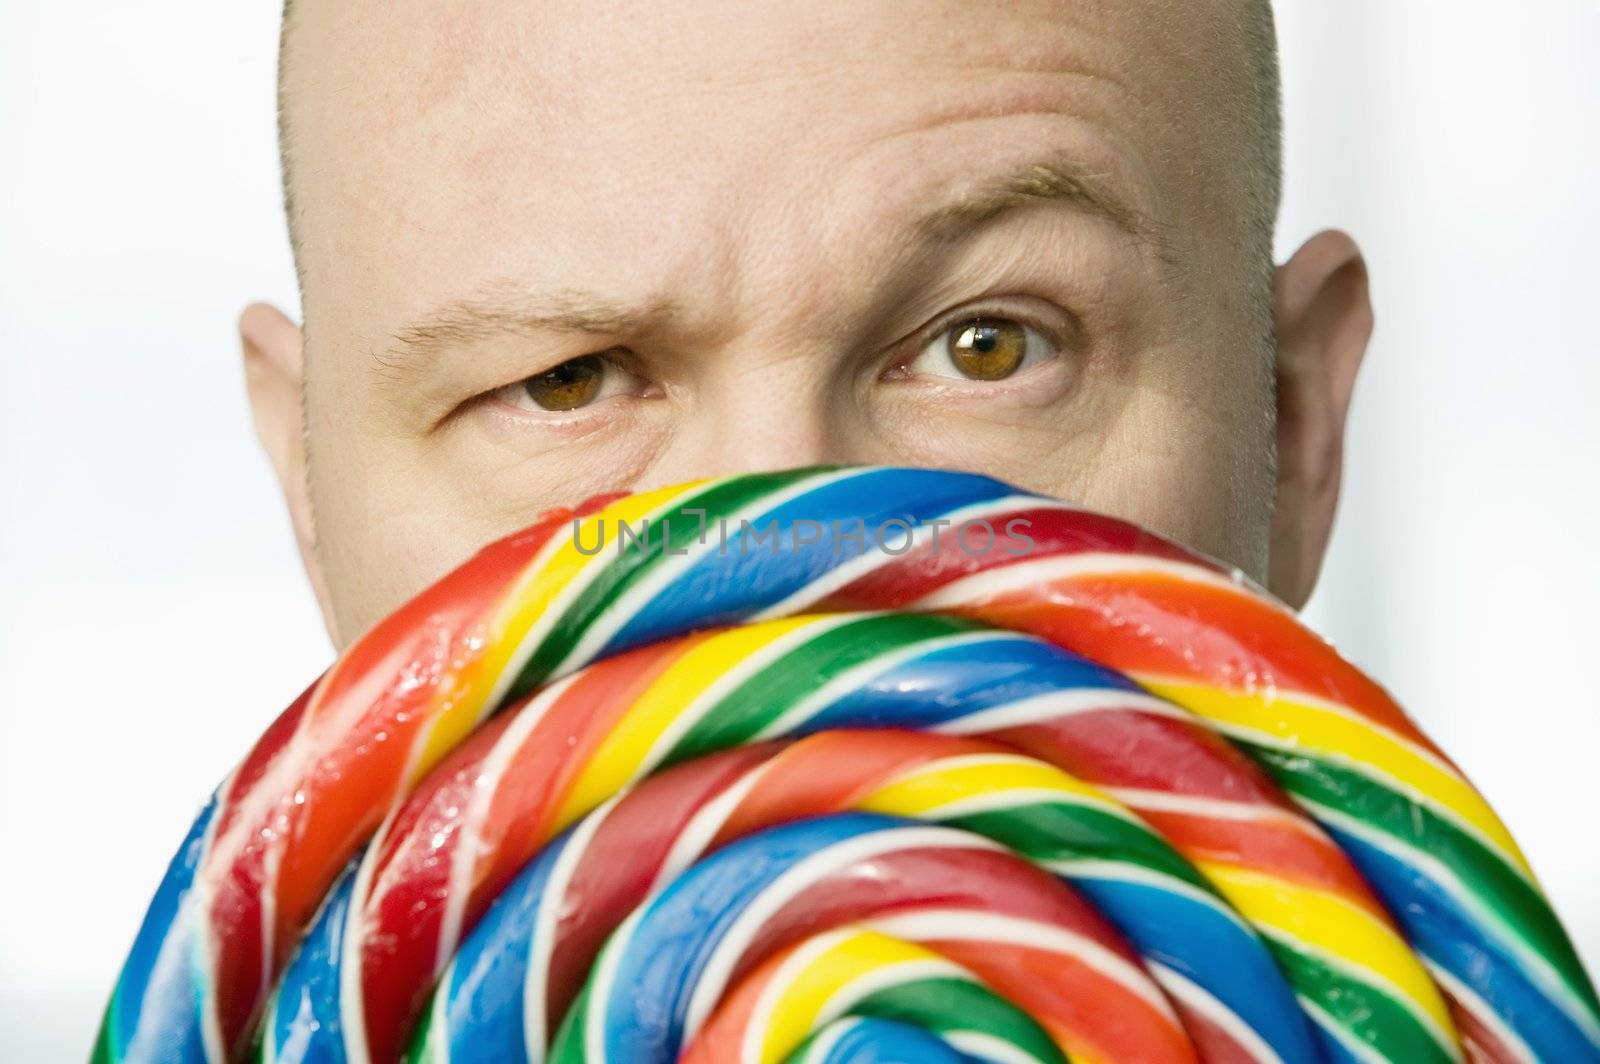 Bald man stares from behind a colorful lollipop